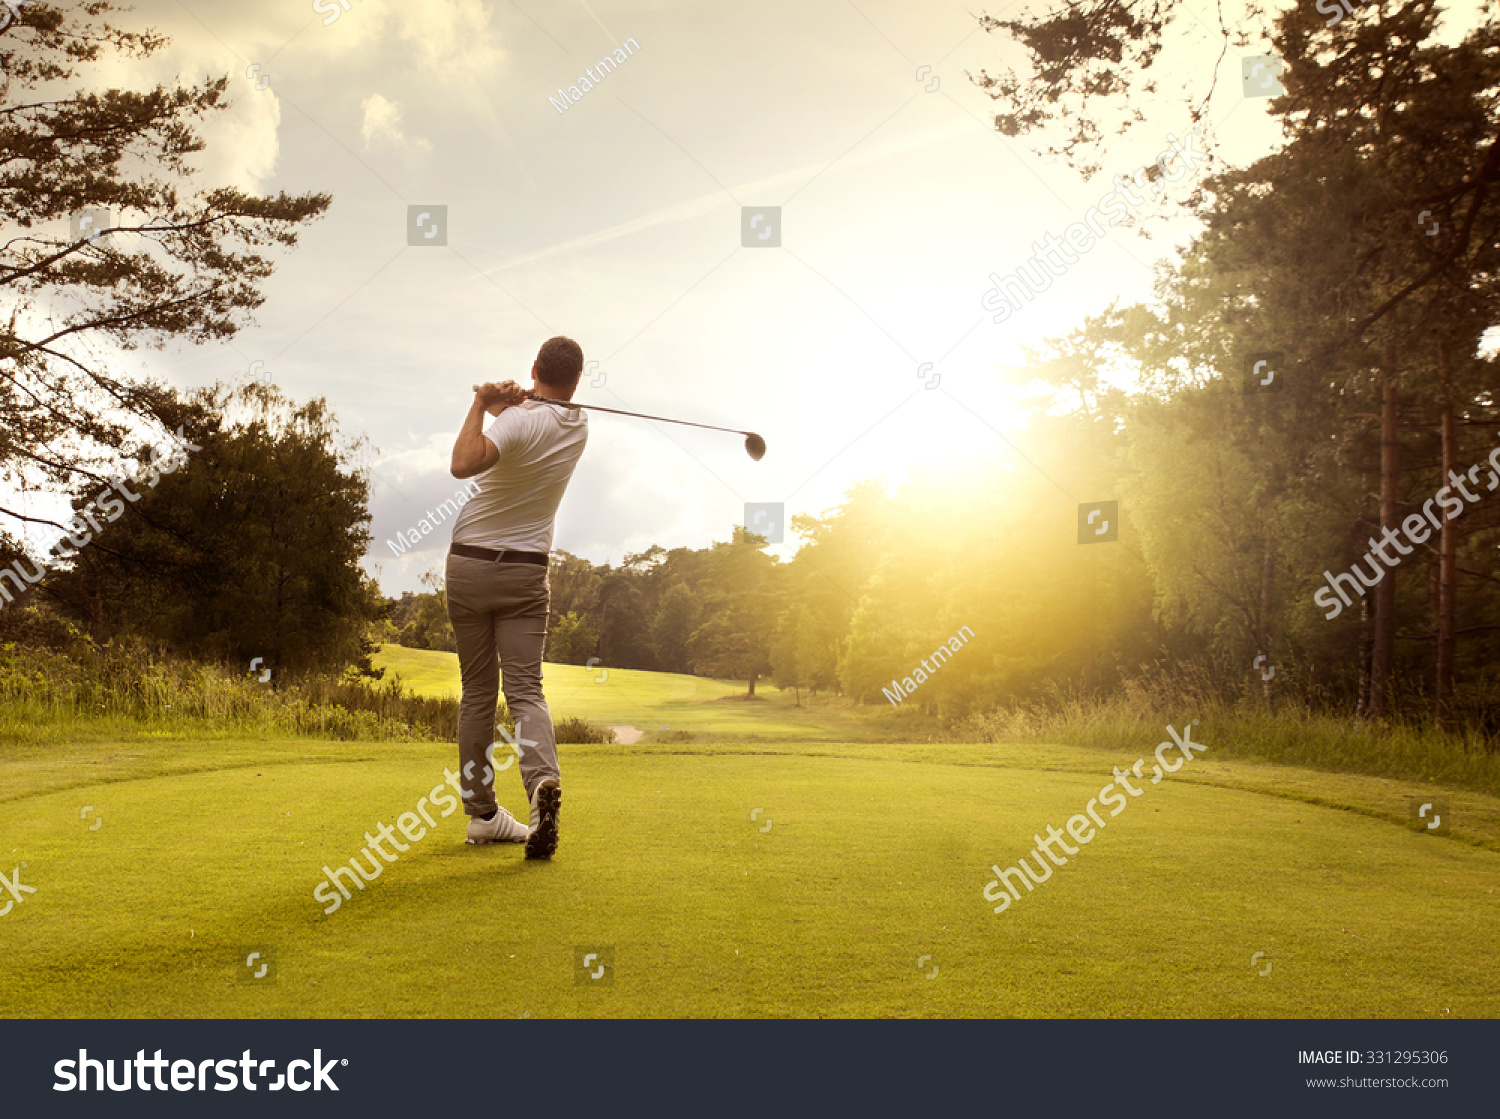 Man playing golf on a golf course in the sun #331295306